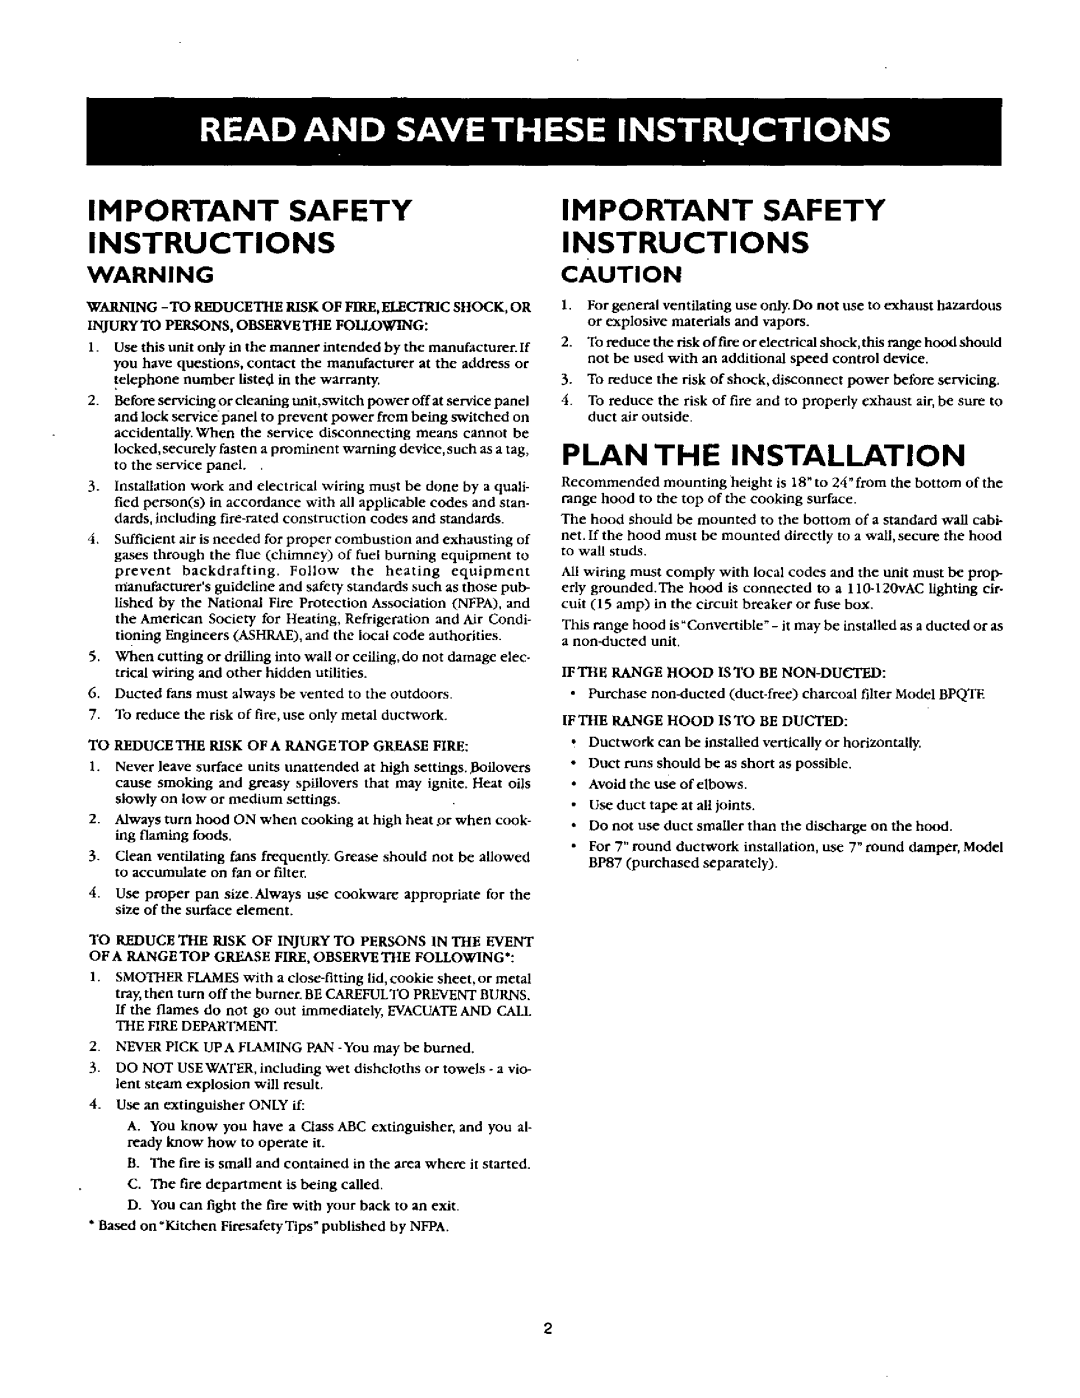 Sears 233.52053, 233.52153 Important Safety Instructions, Plan The Installation, Ii Liryto Persons, Observethe Following 